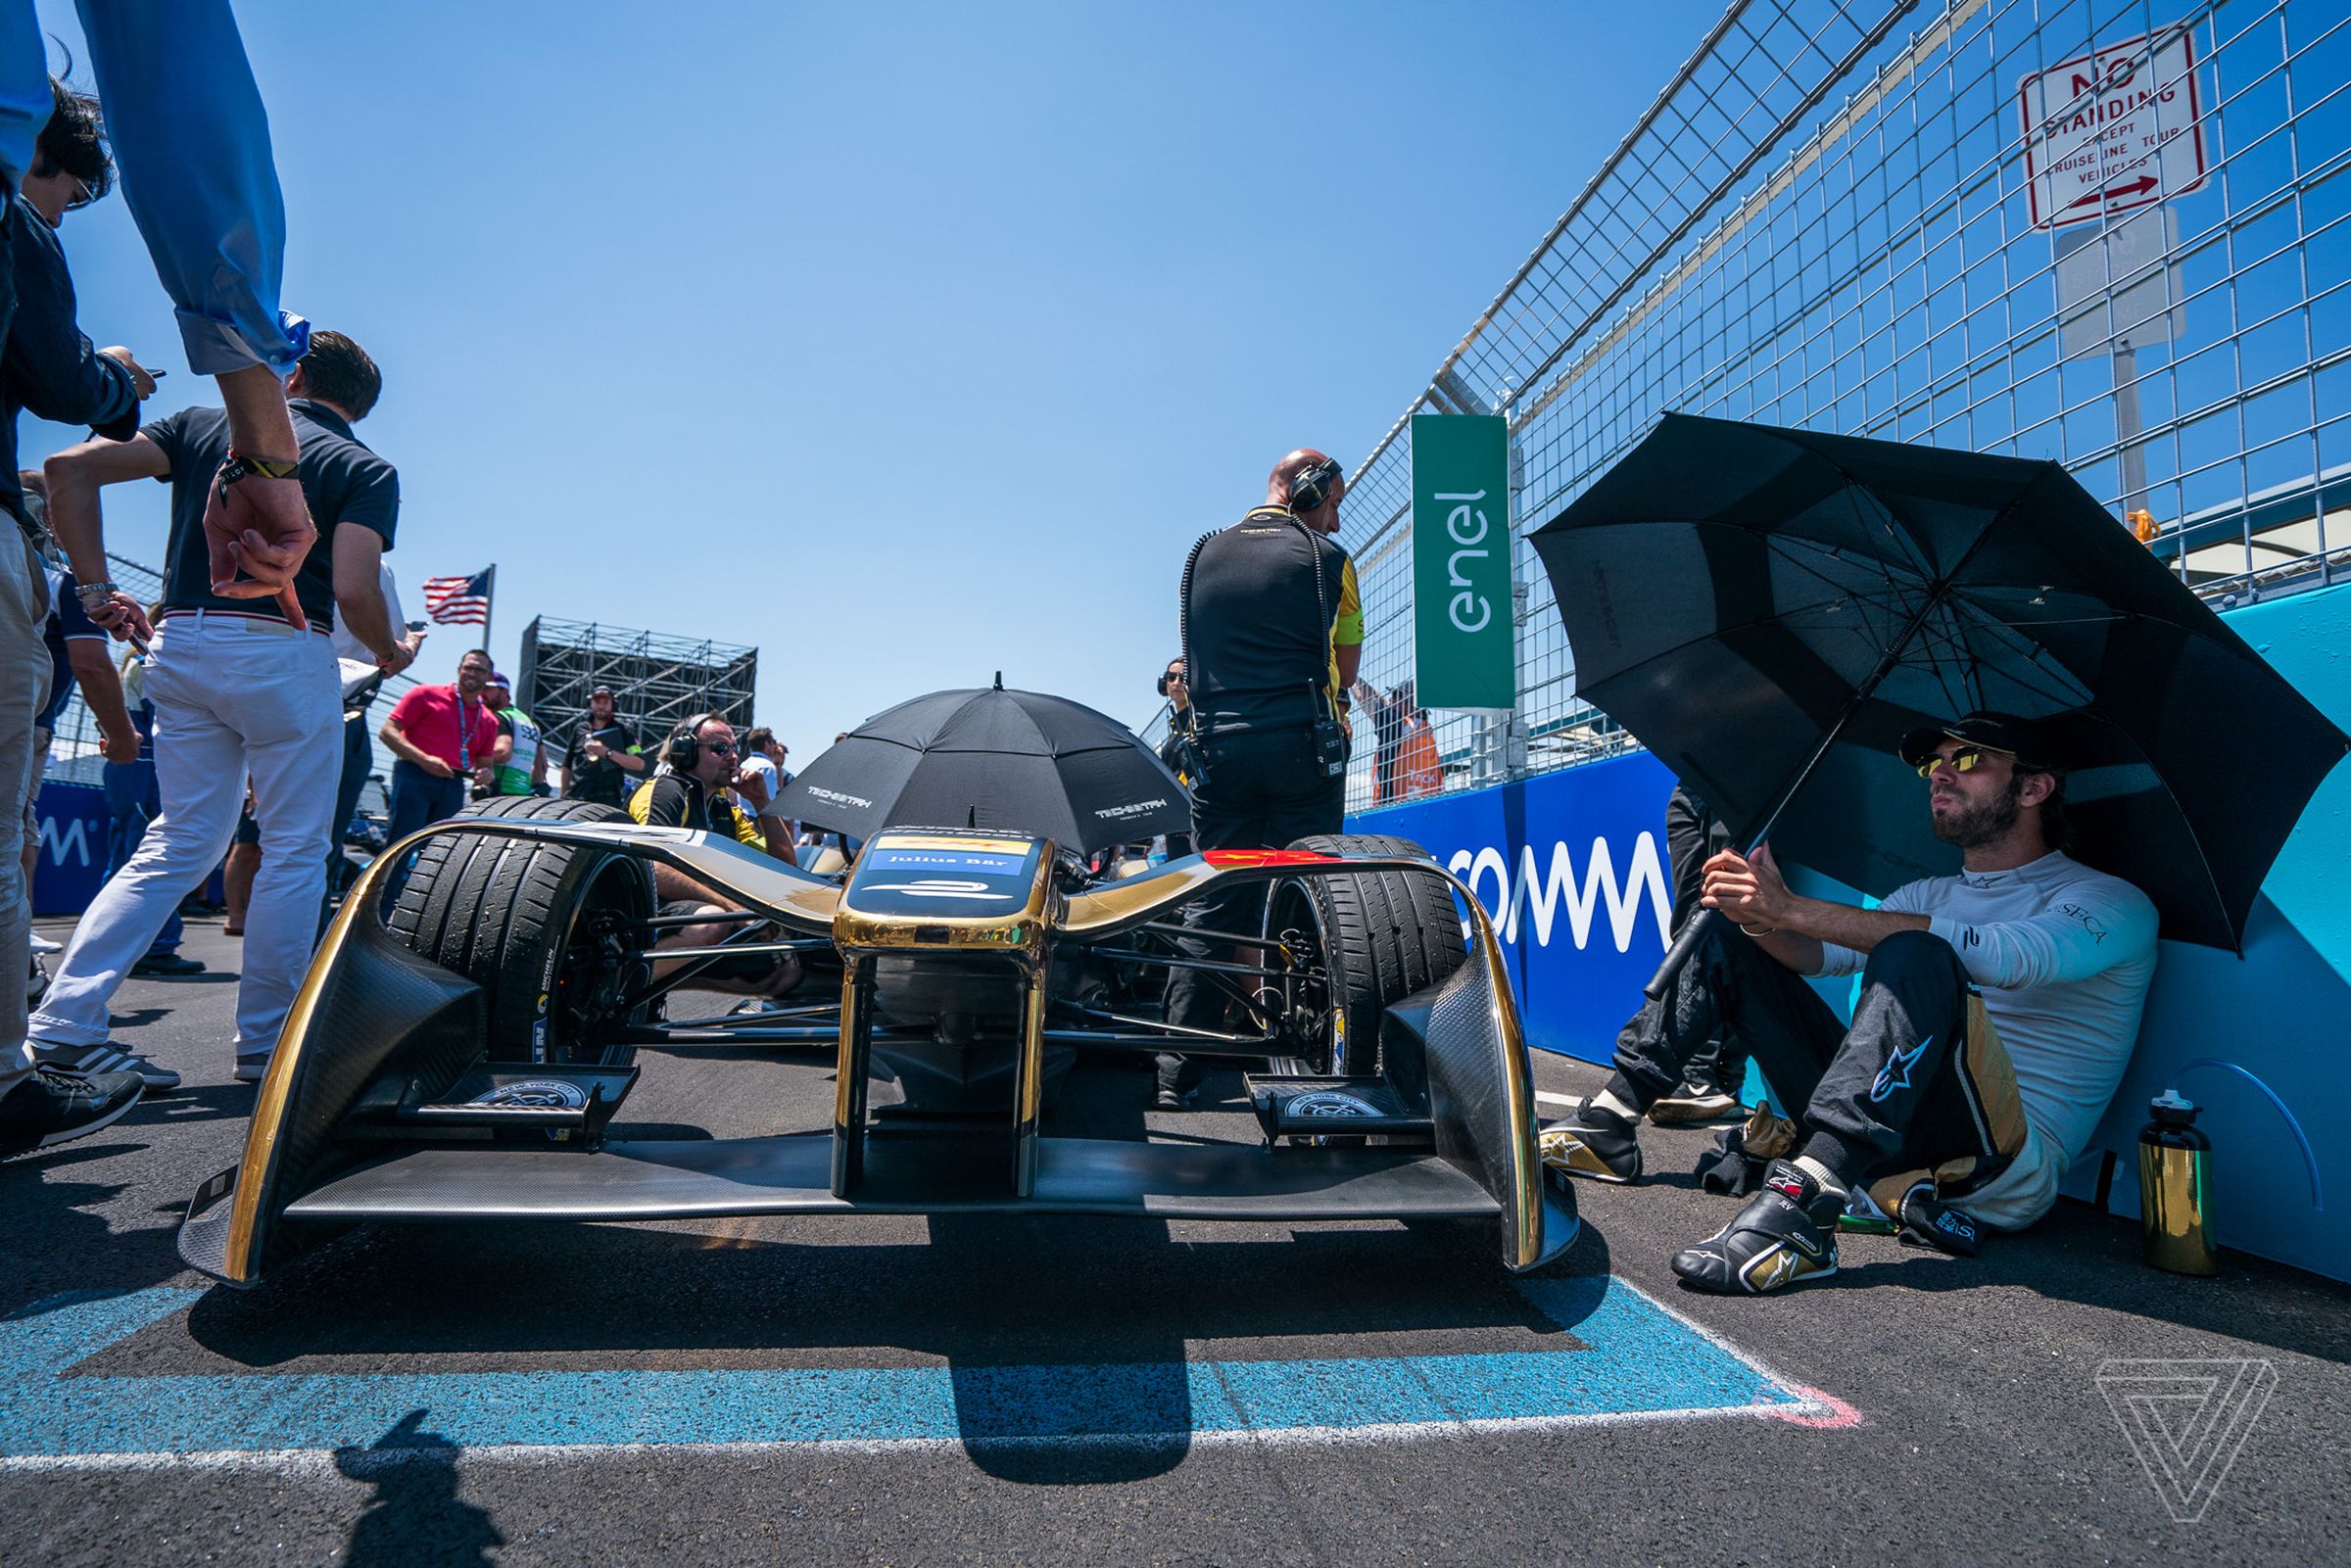 Techeetah driver Jean-Eric Vergne had some strong words about the length of Sunday’s race. He worried the teams would be too focused saving battery over putting on a good show. 